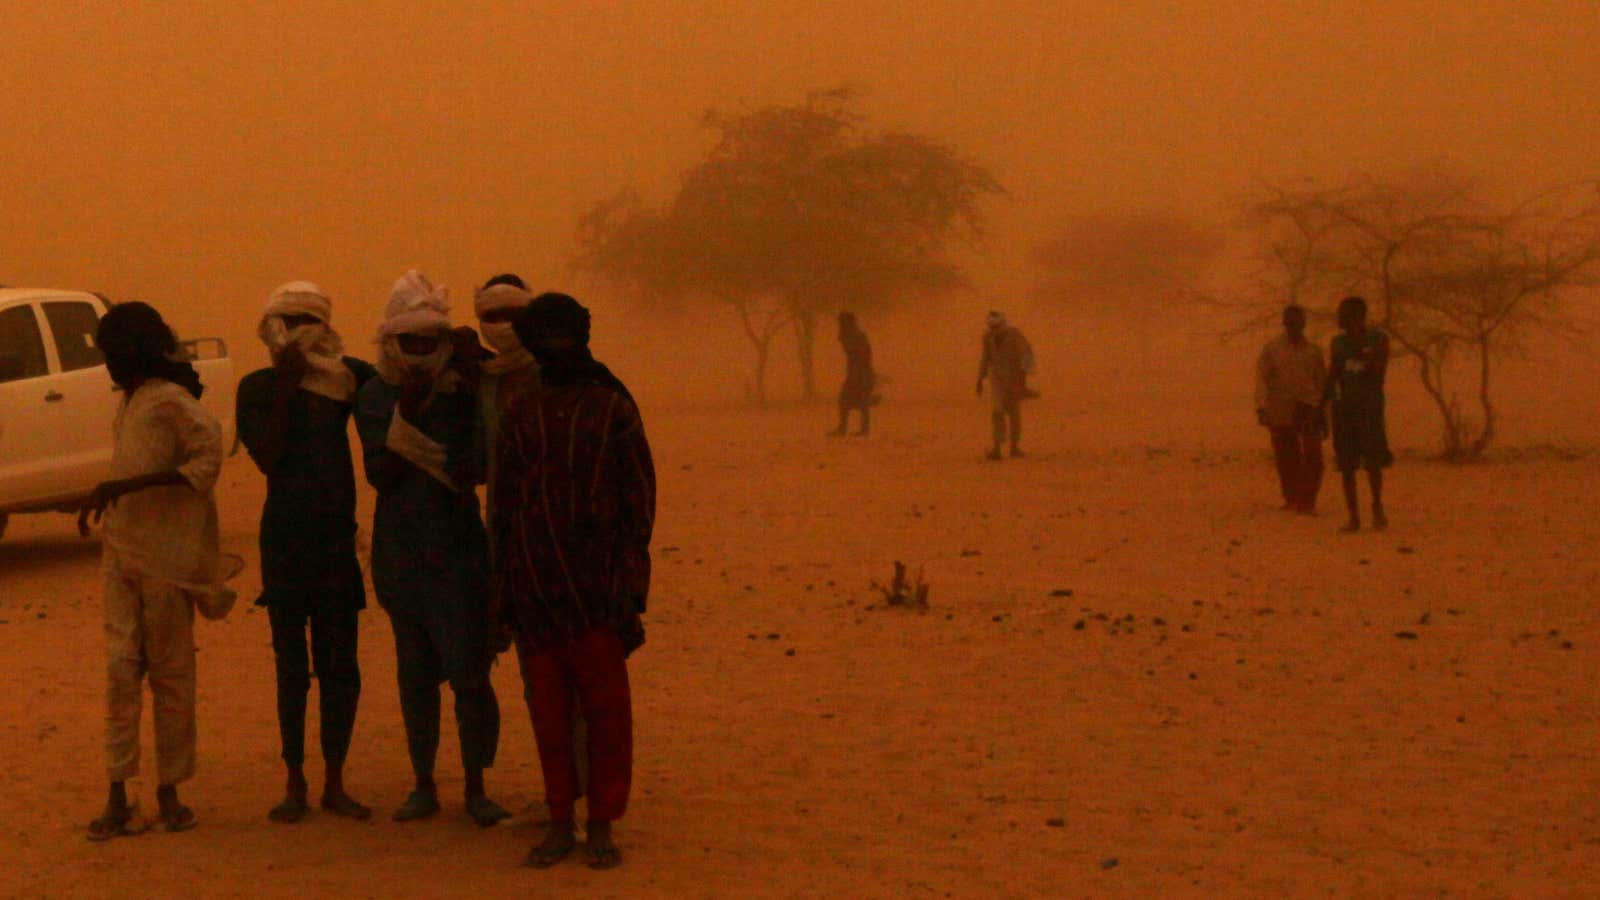 Desertification is a real problem in sub-Saharan Africa.